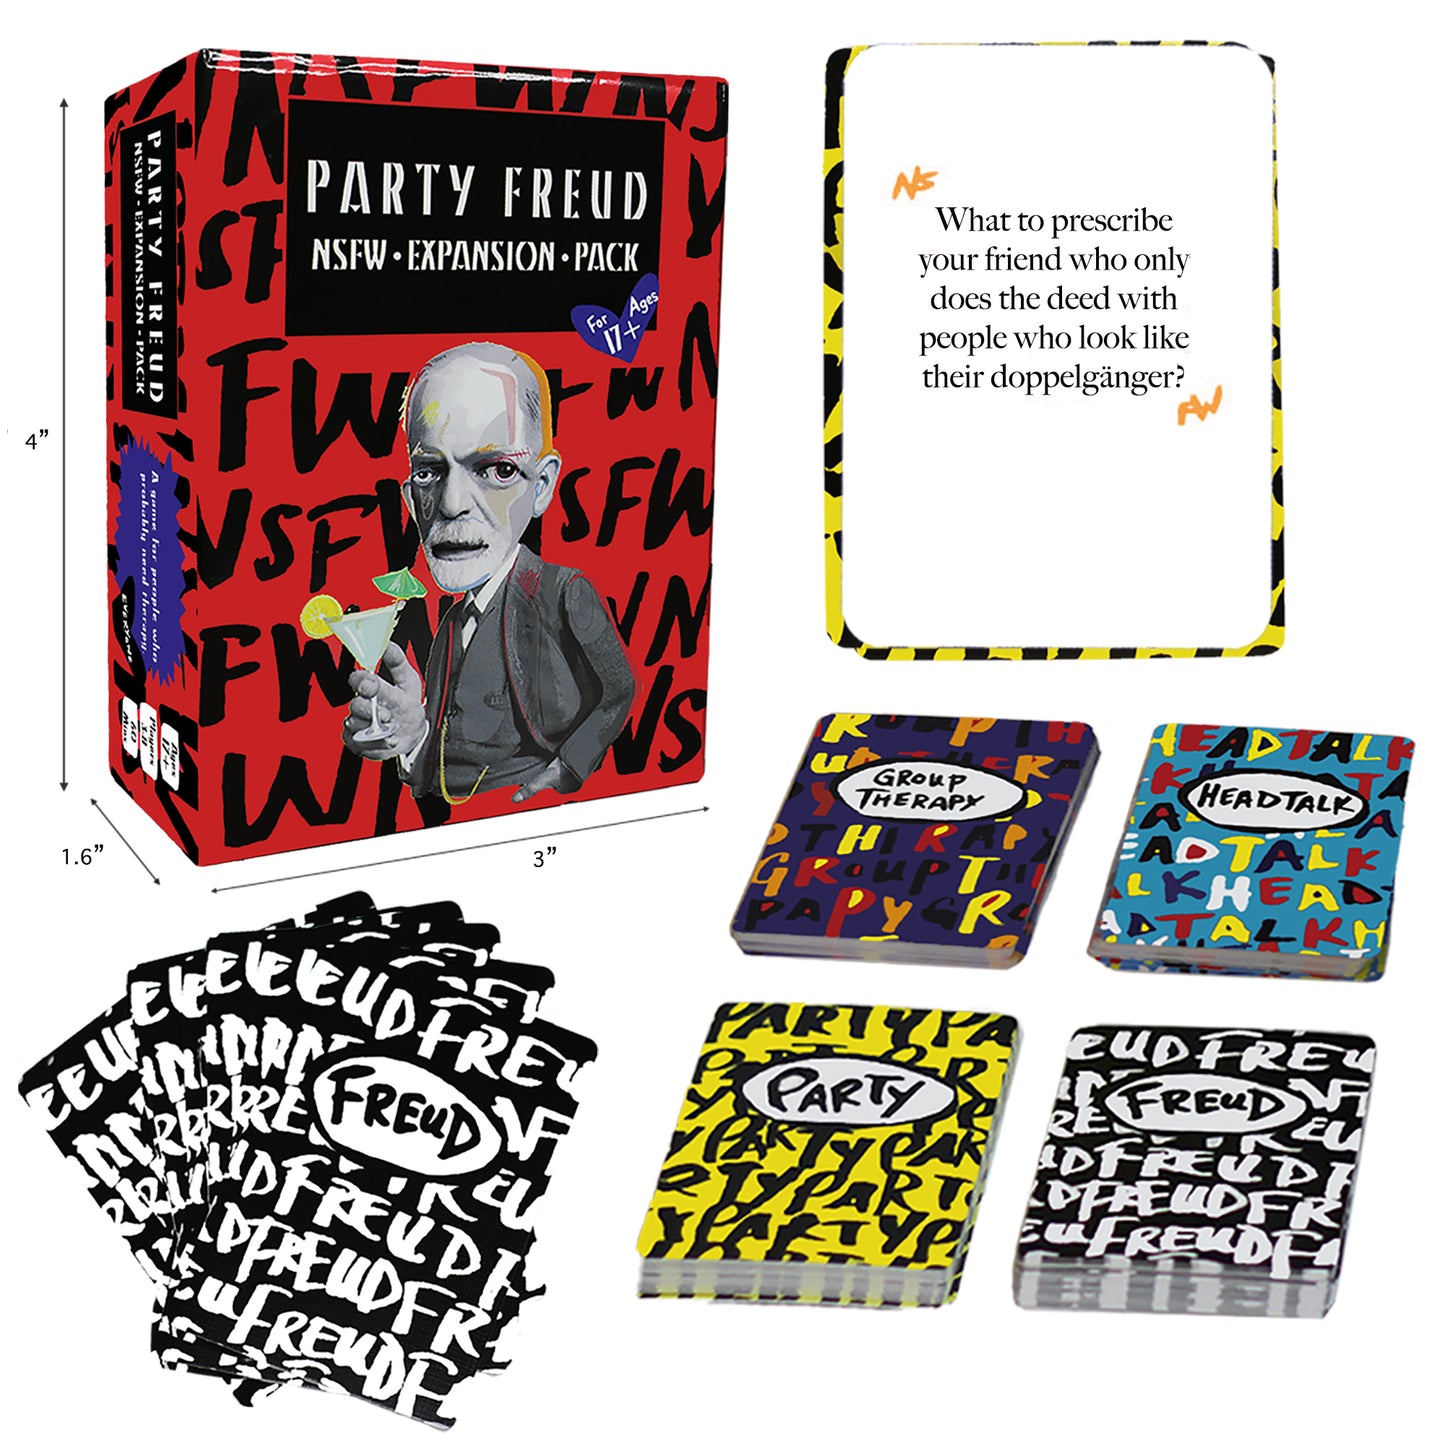 NSFW PARTY FREUD EXPANSION PACK